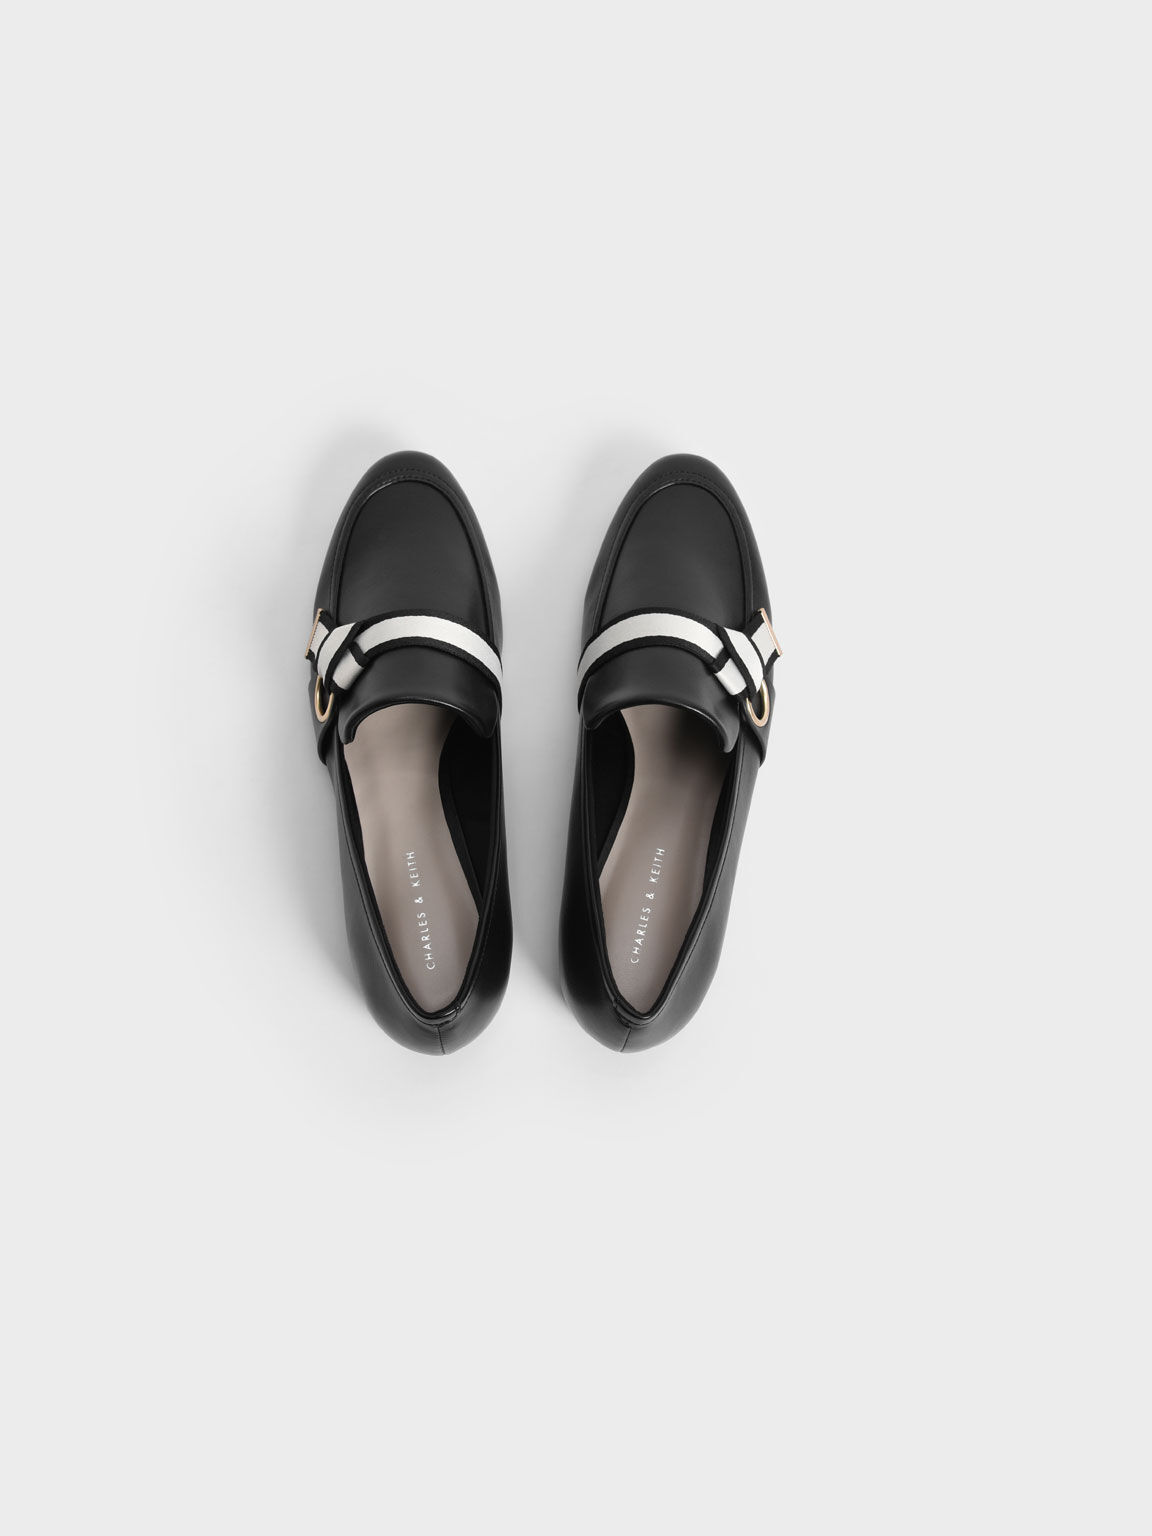 Fabric Knot Penny Loafers, Black, hi-res